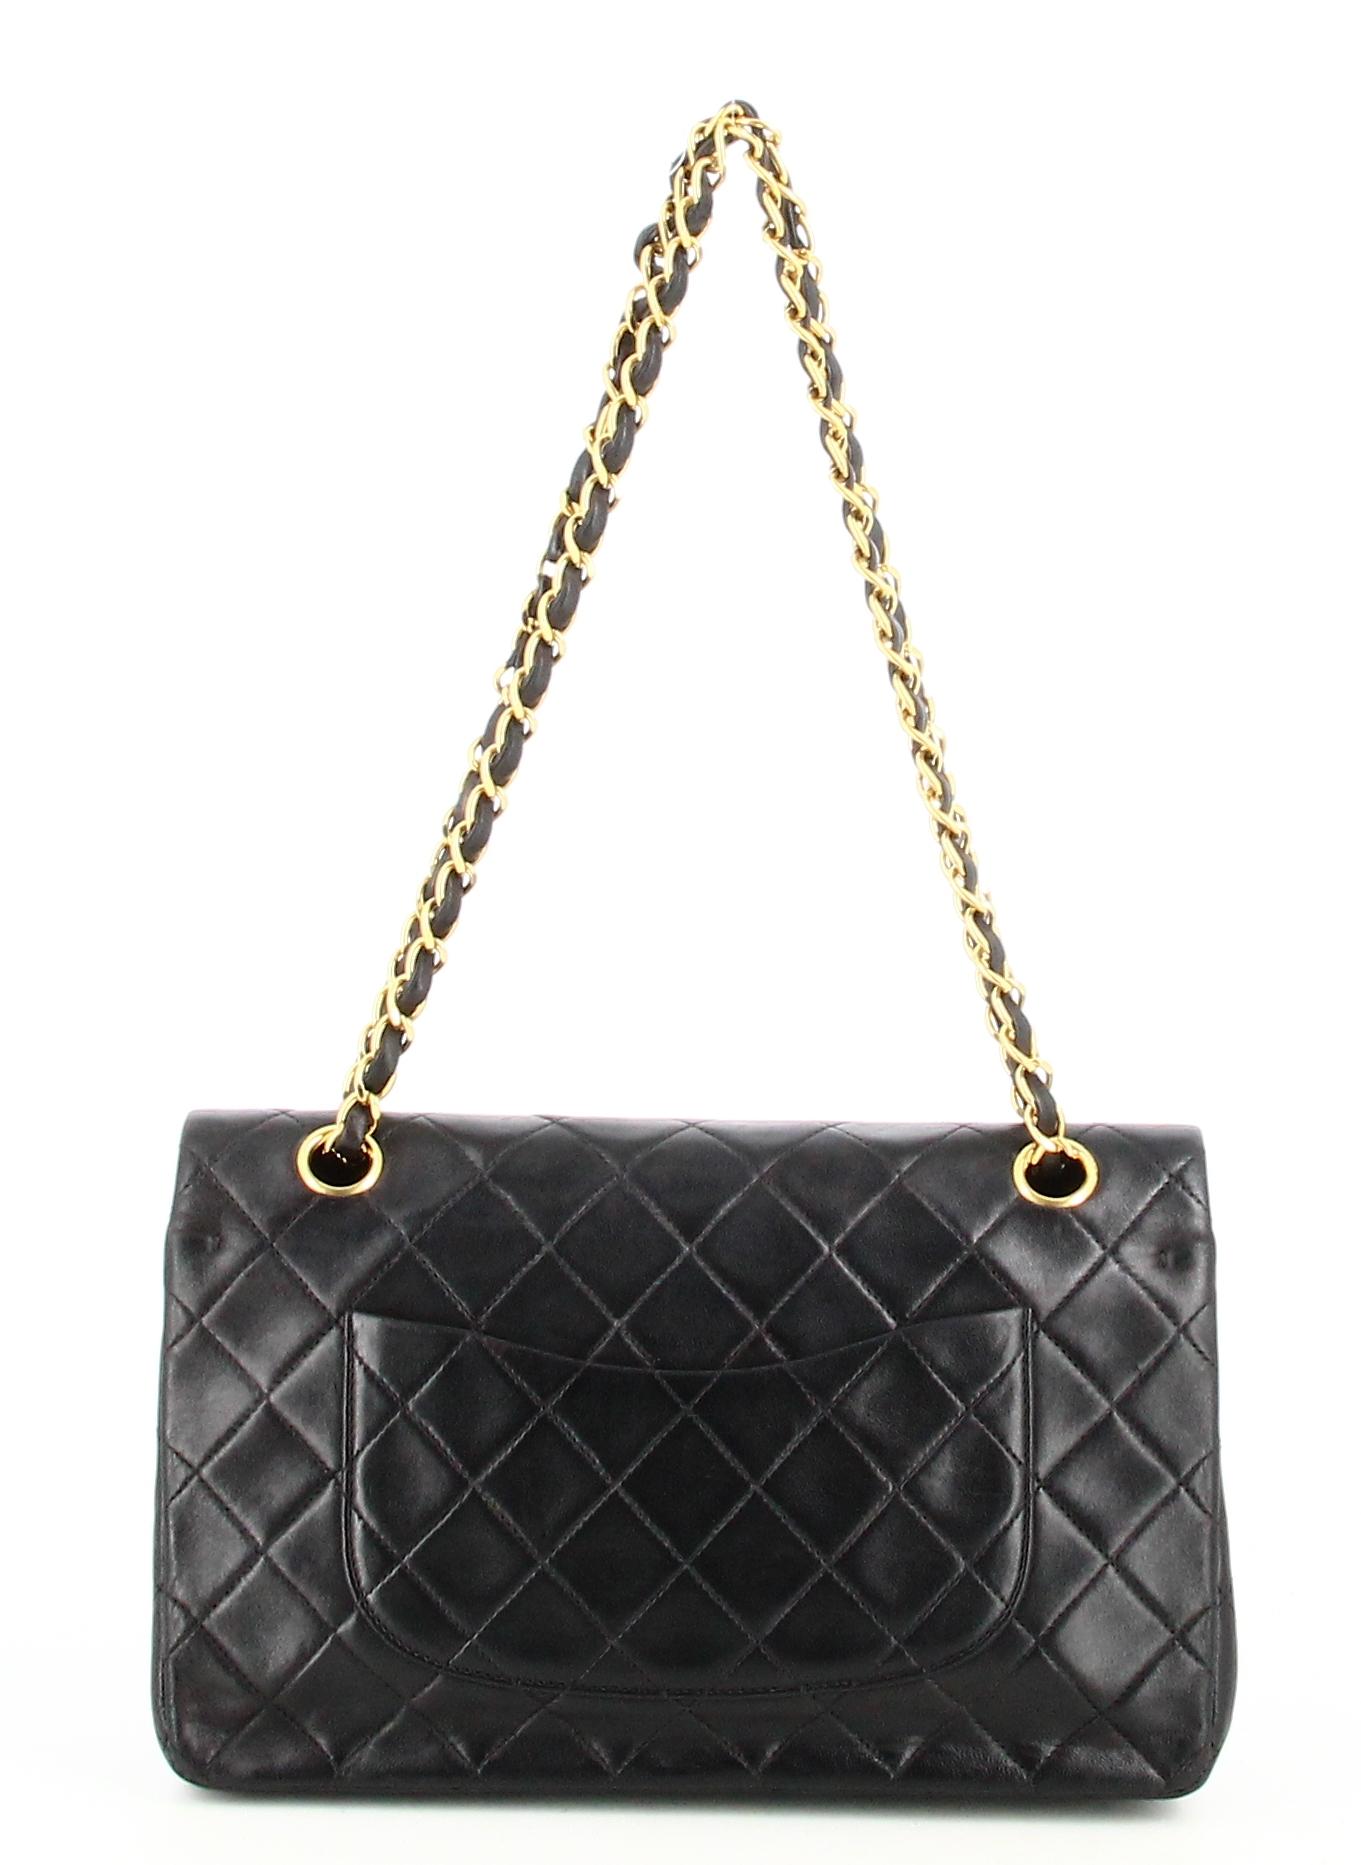 1991 Chanel Timeless Handbag In Black Quilted Leather  2